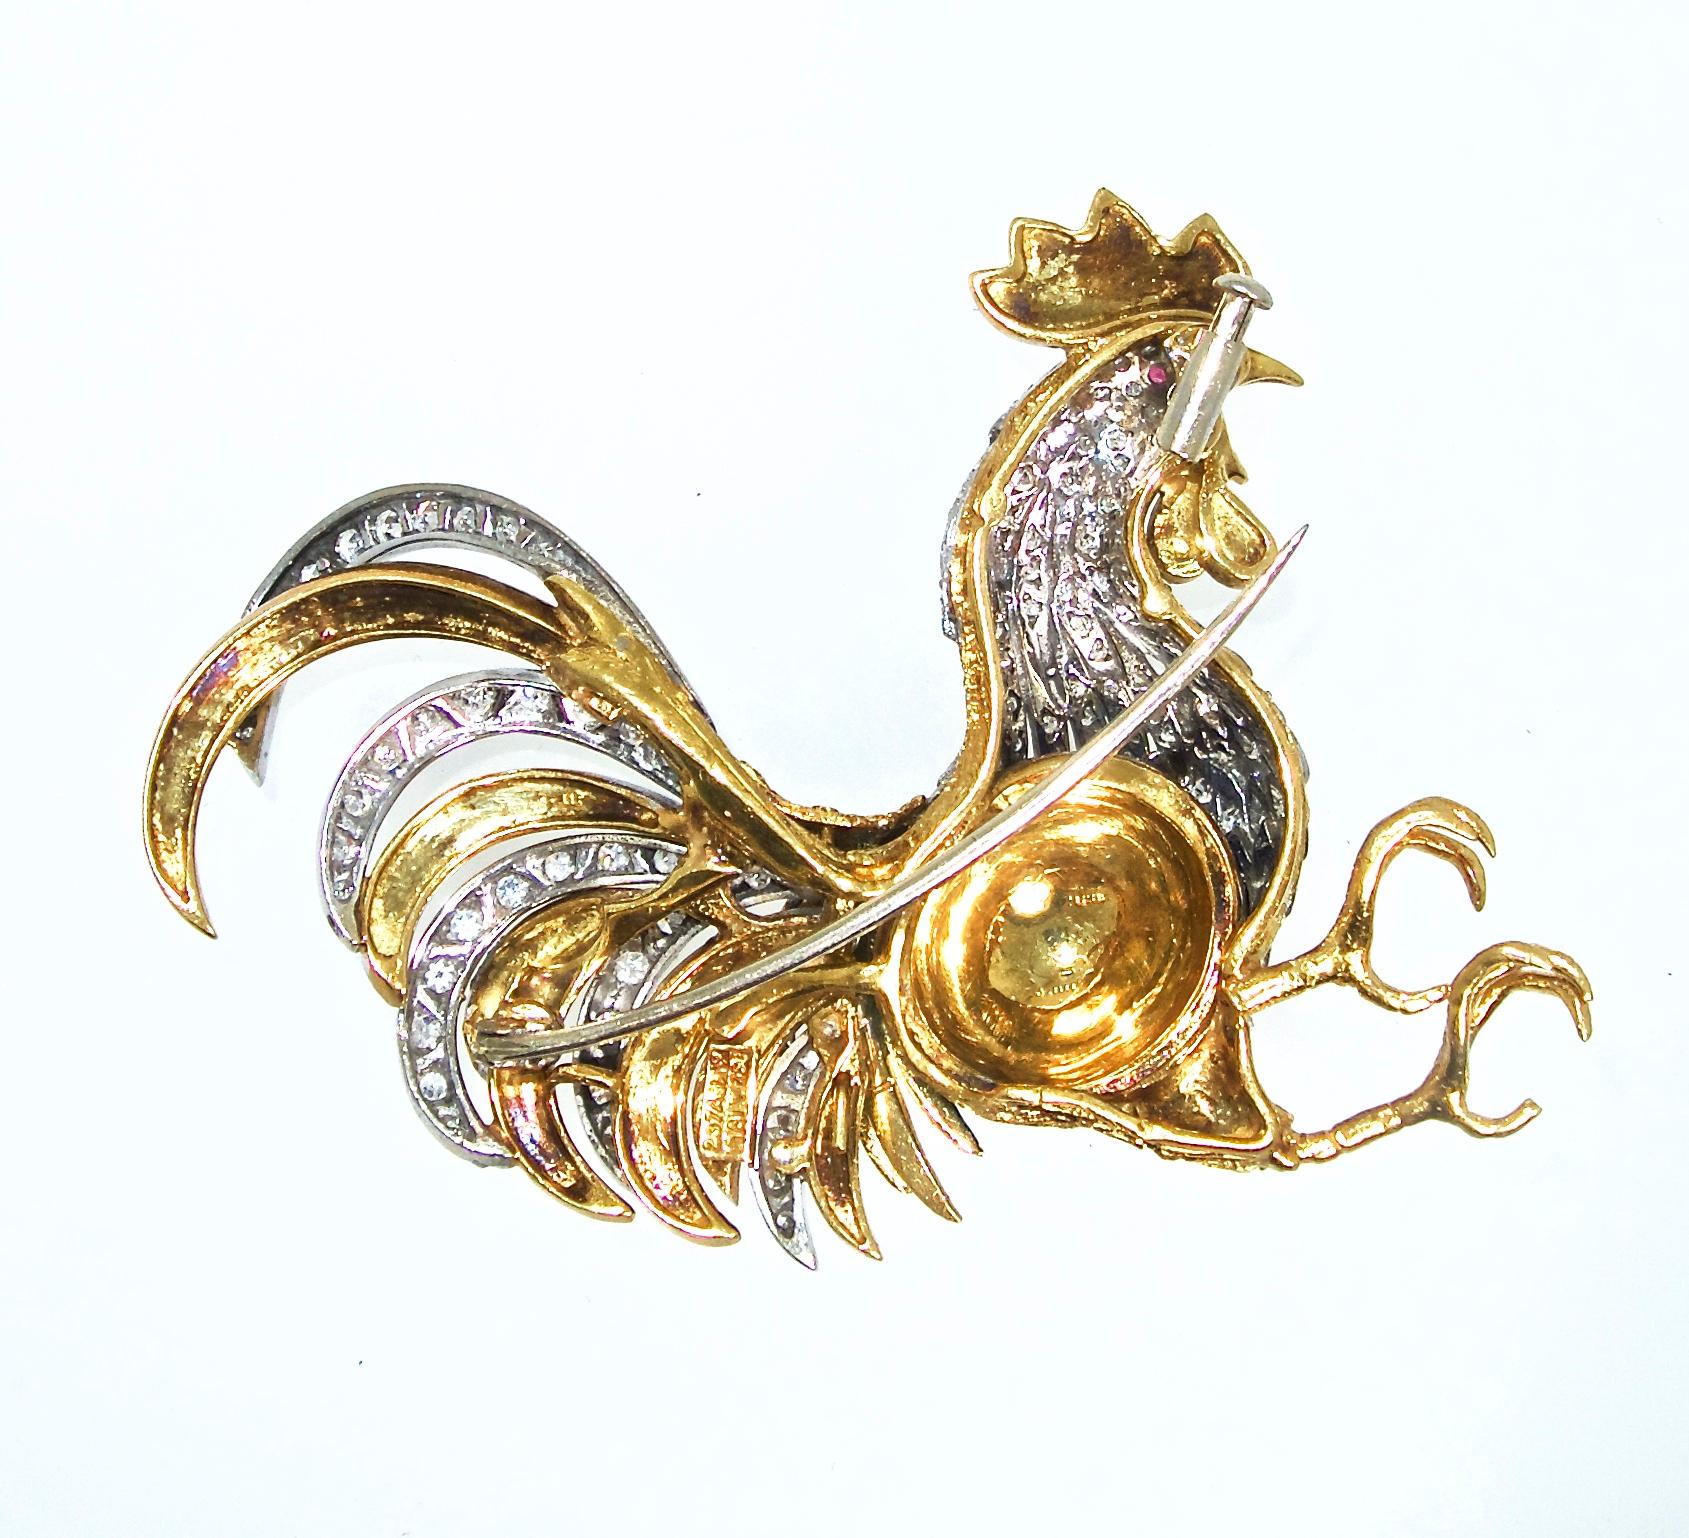 The rooster is 18K white and yellow gold, with 130 diamonds weighing approximately 1 ct and accented with enamel.  Mr. rooster's eyes are small natural rubies.  He is 2.75 inches long.